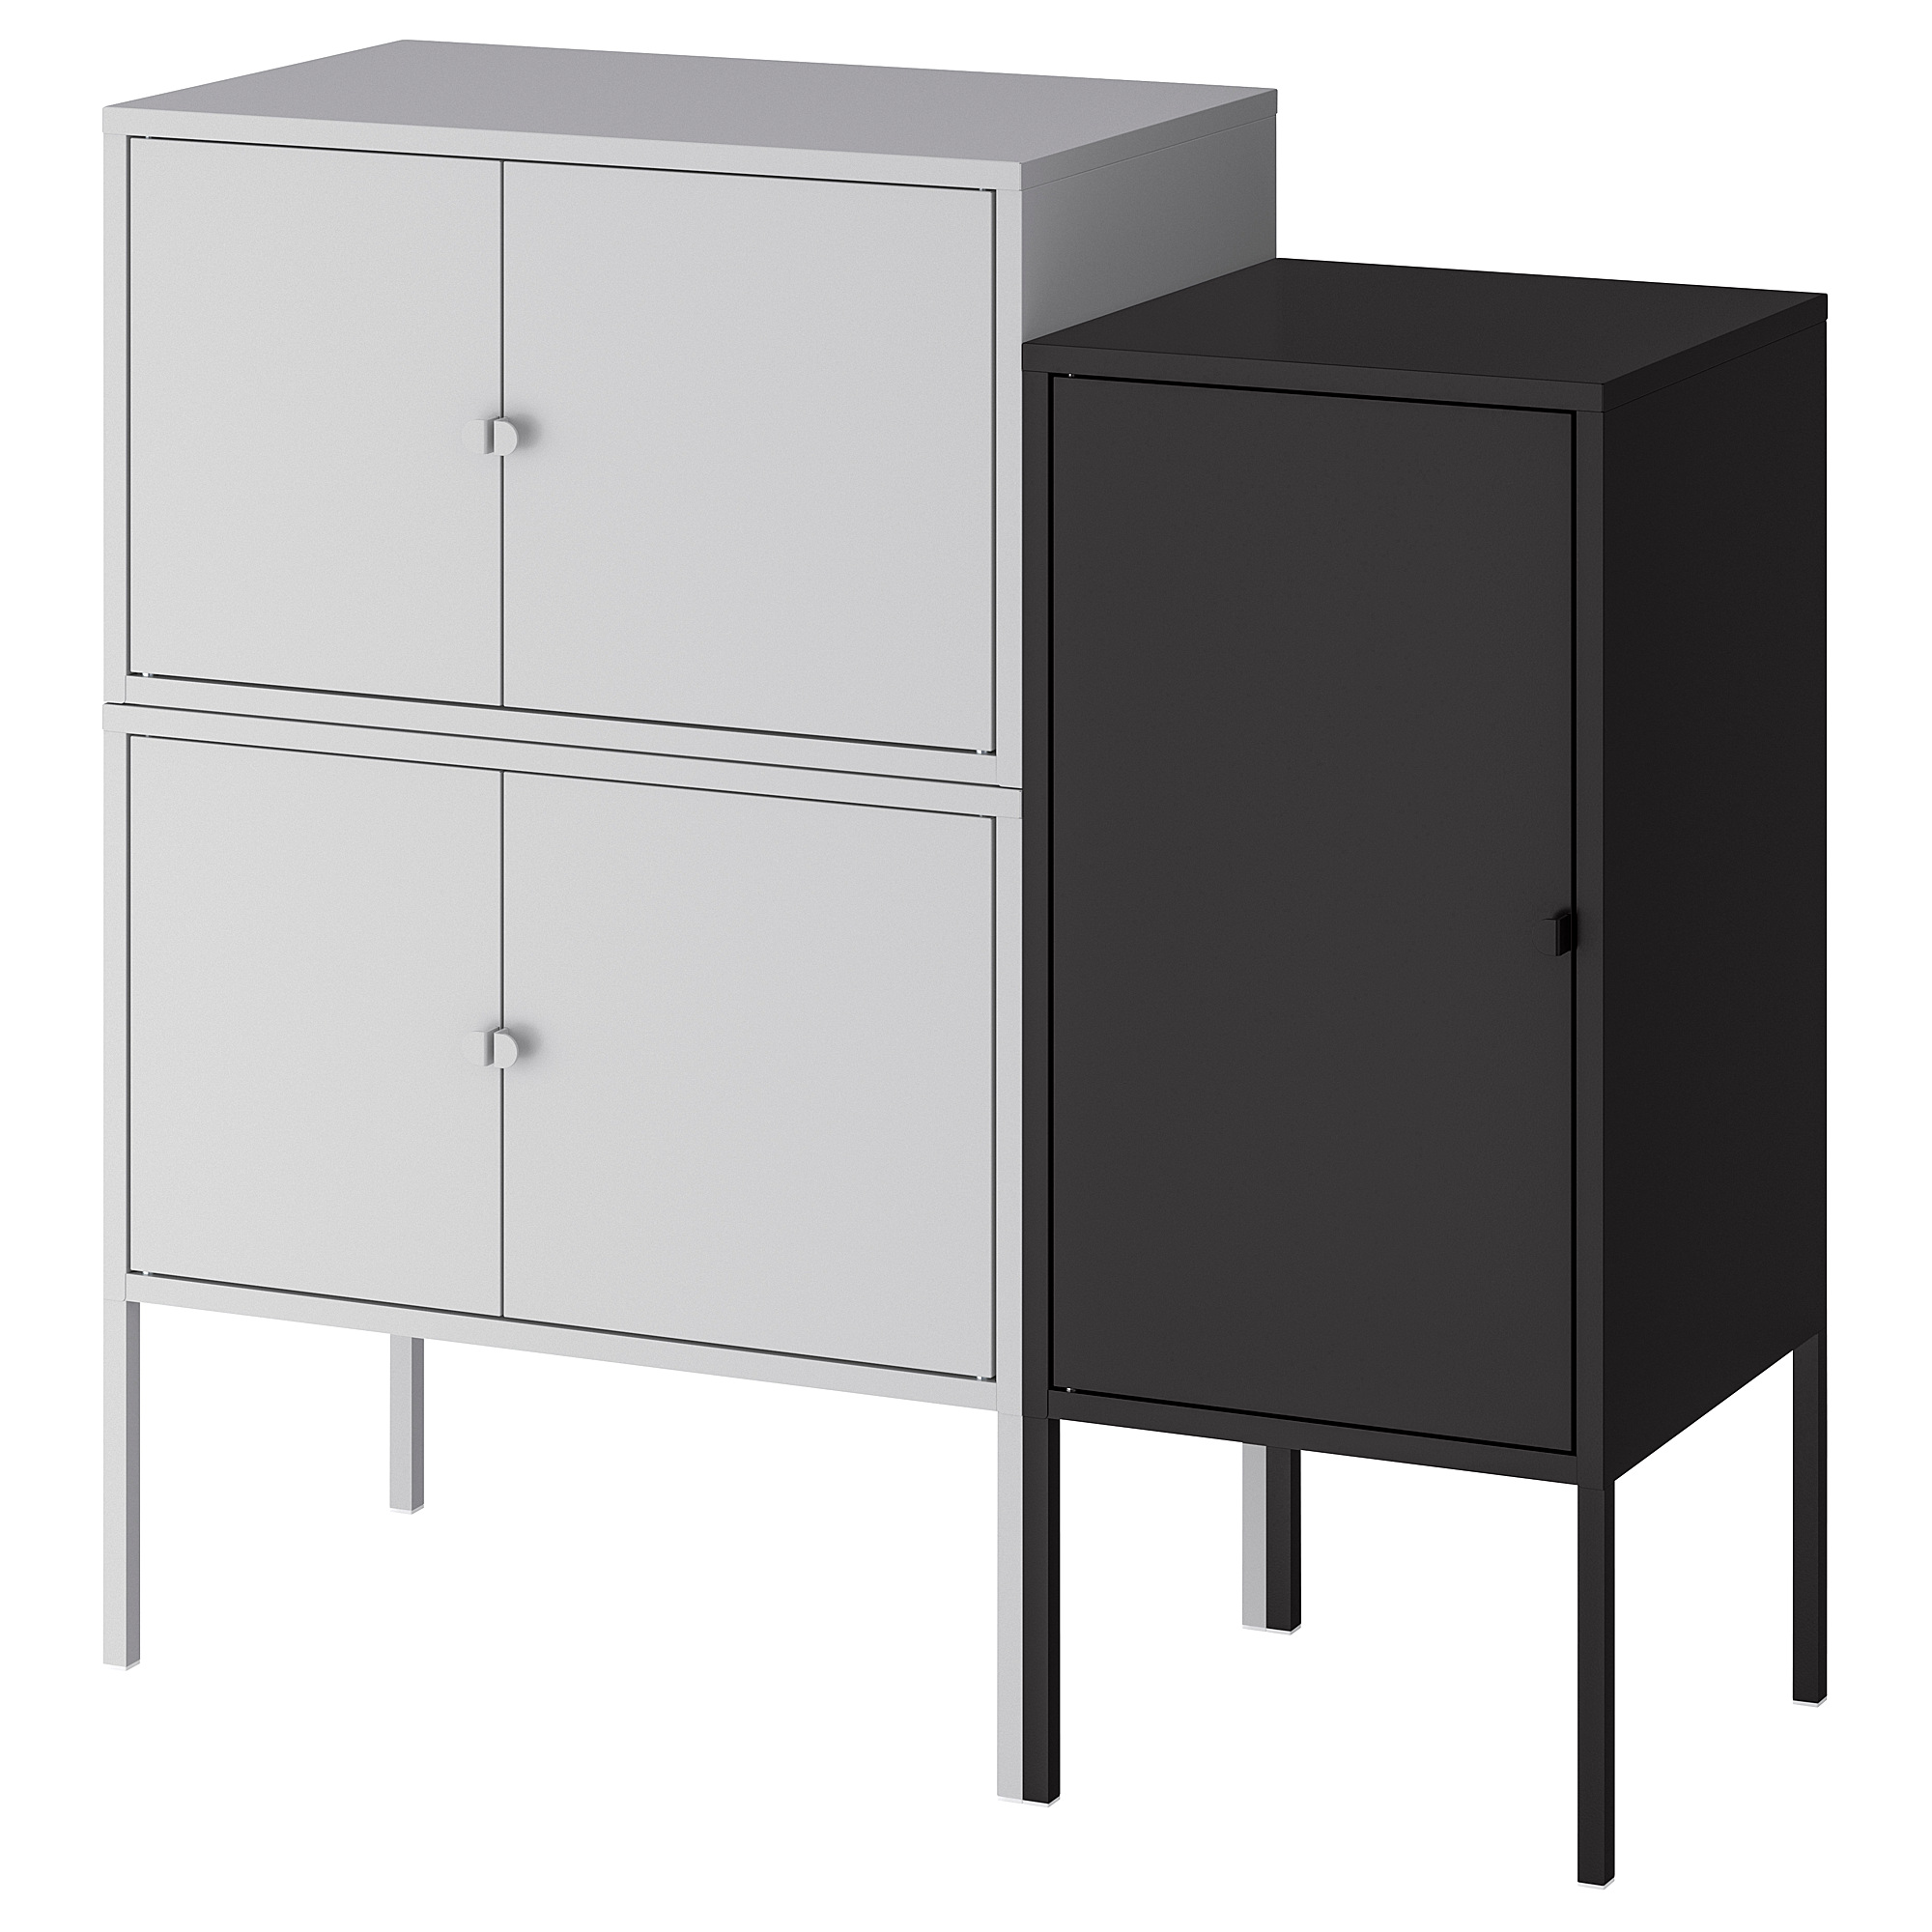 LIXHULT cabinet combination